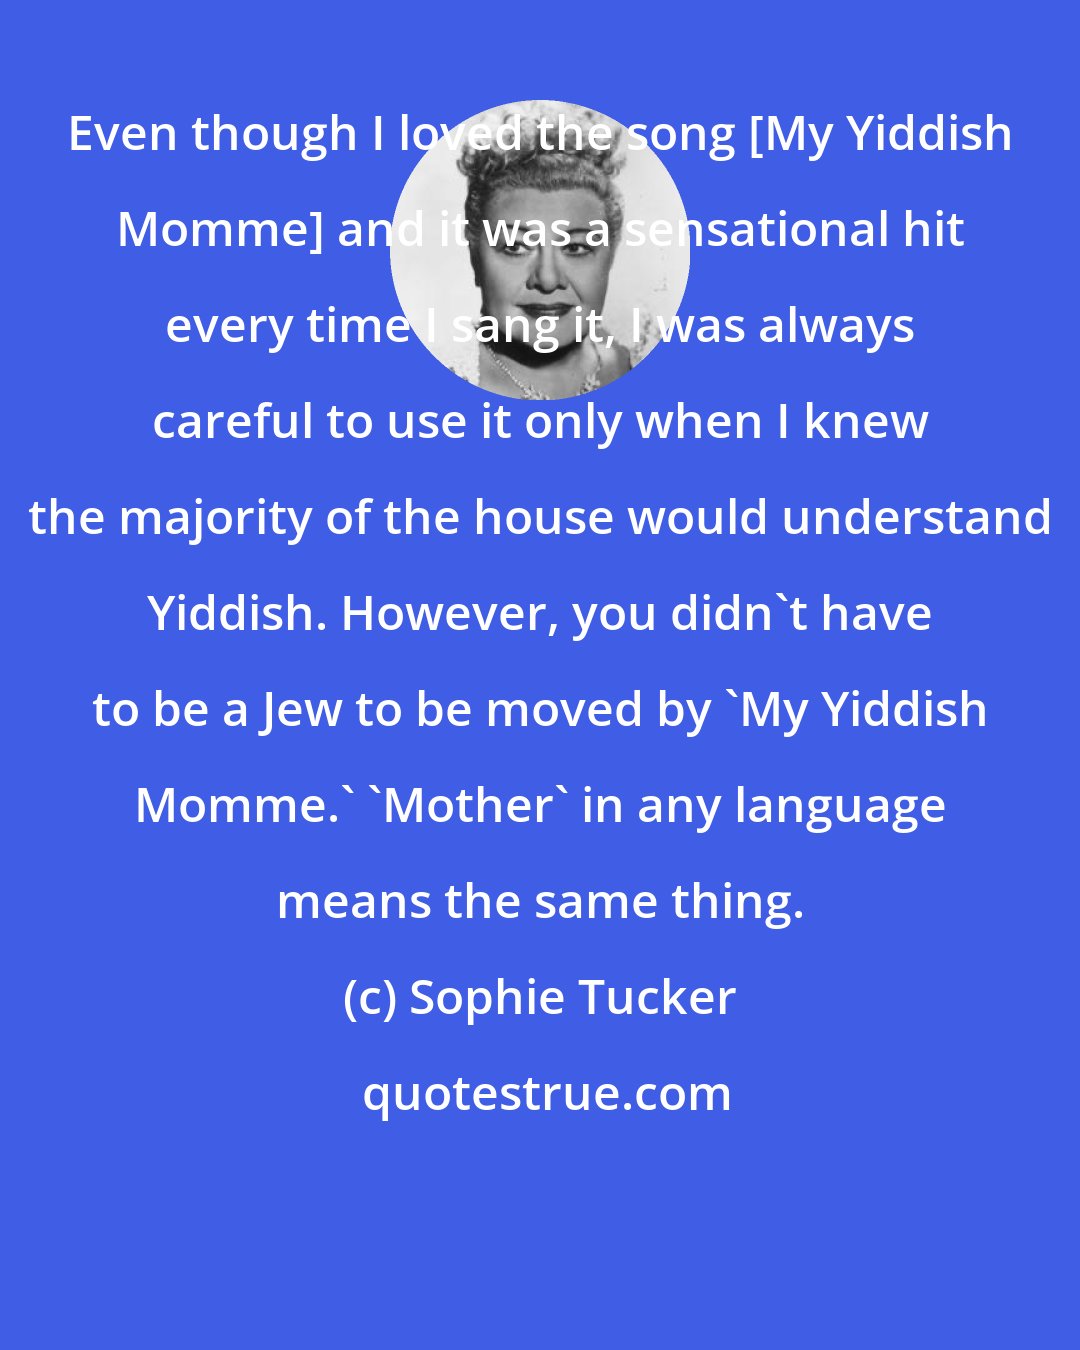 Sophie Tucker: Even though I loved the song [My Yiddish Momme] and it was a sensational hit every time I sang it, I was always careful to use it only when I knew the majority of the house would understand Yiddish. However, you didn't have to be a Jew to be moved by 'My Yiddish Momme.' 'Mother' in any language means the same thing.